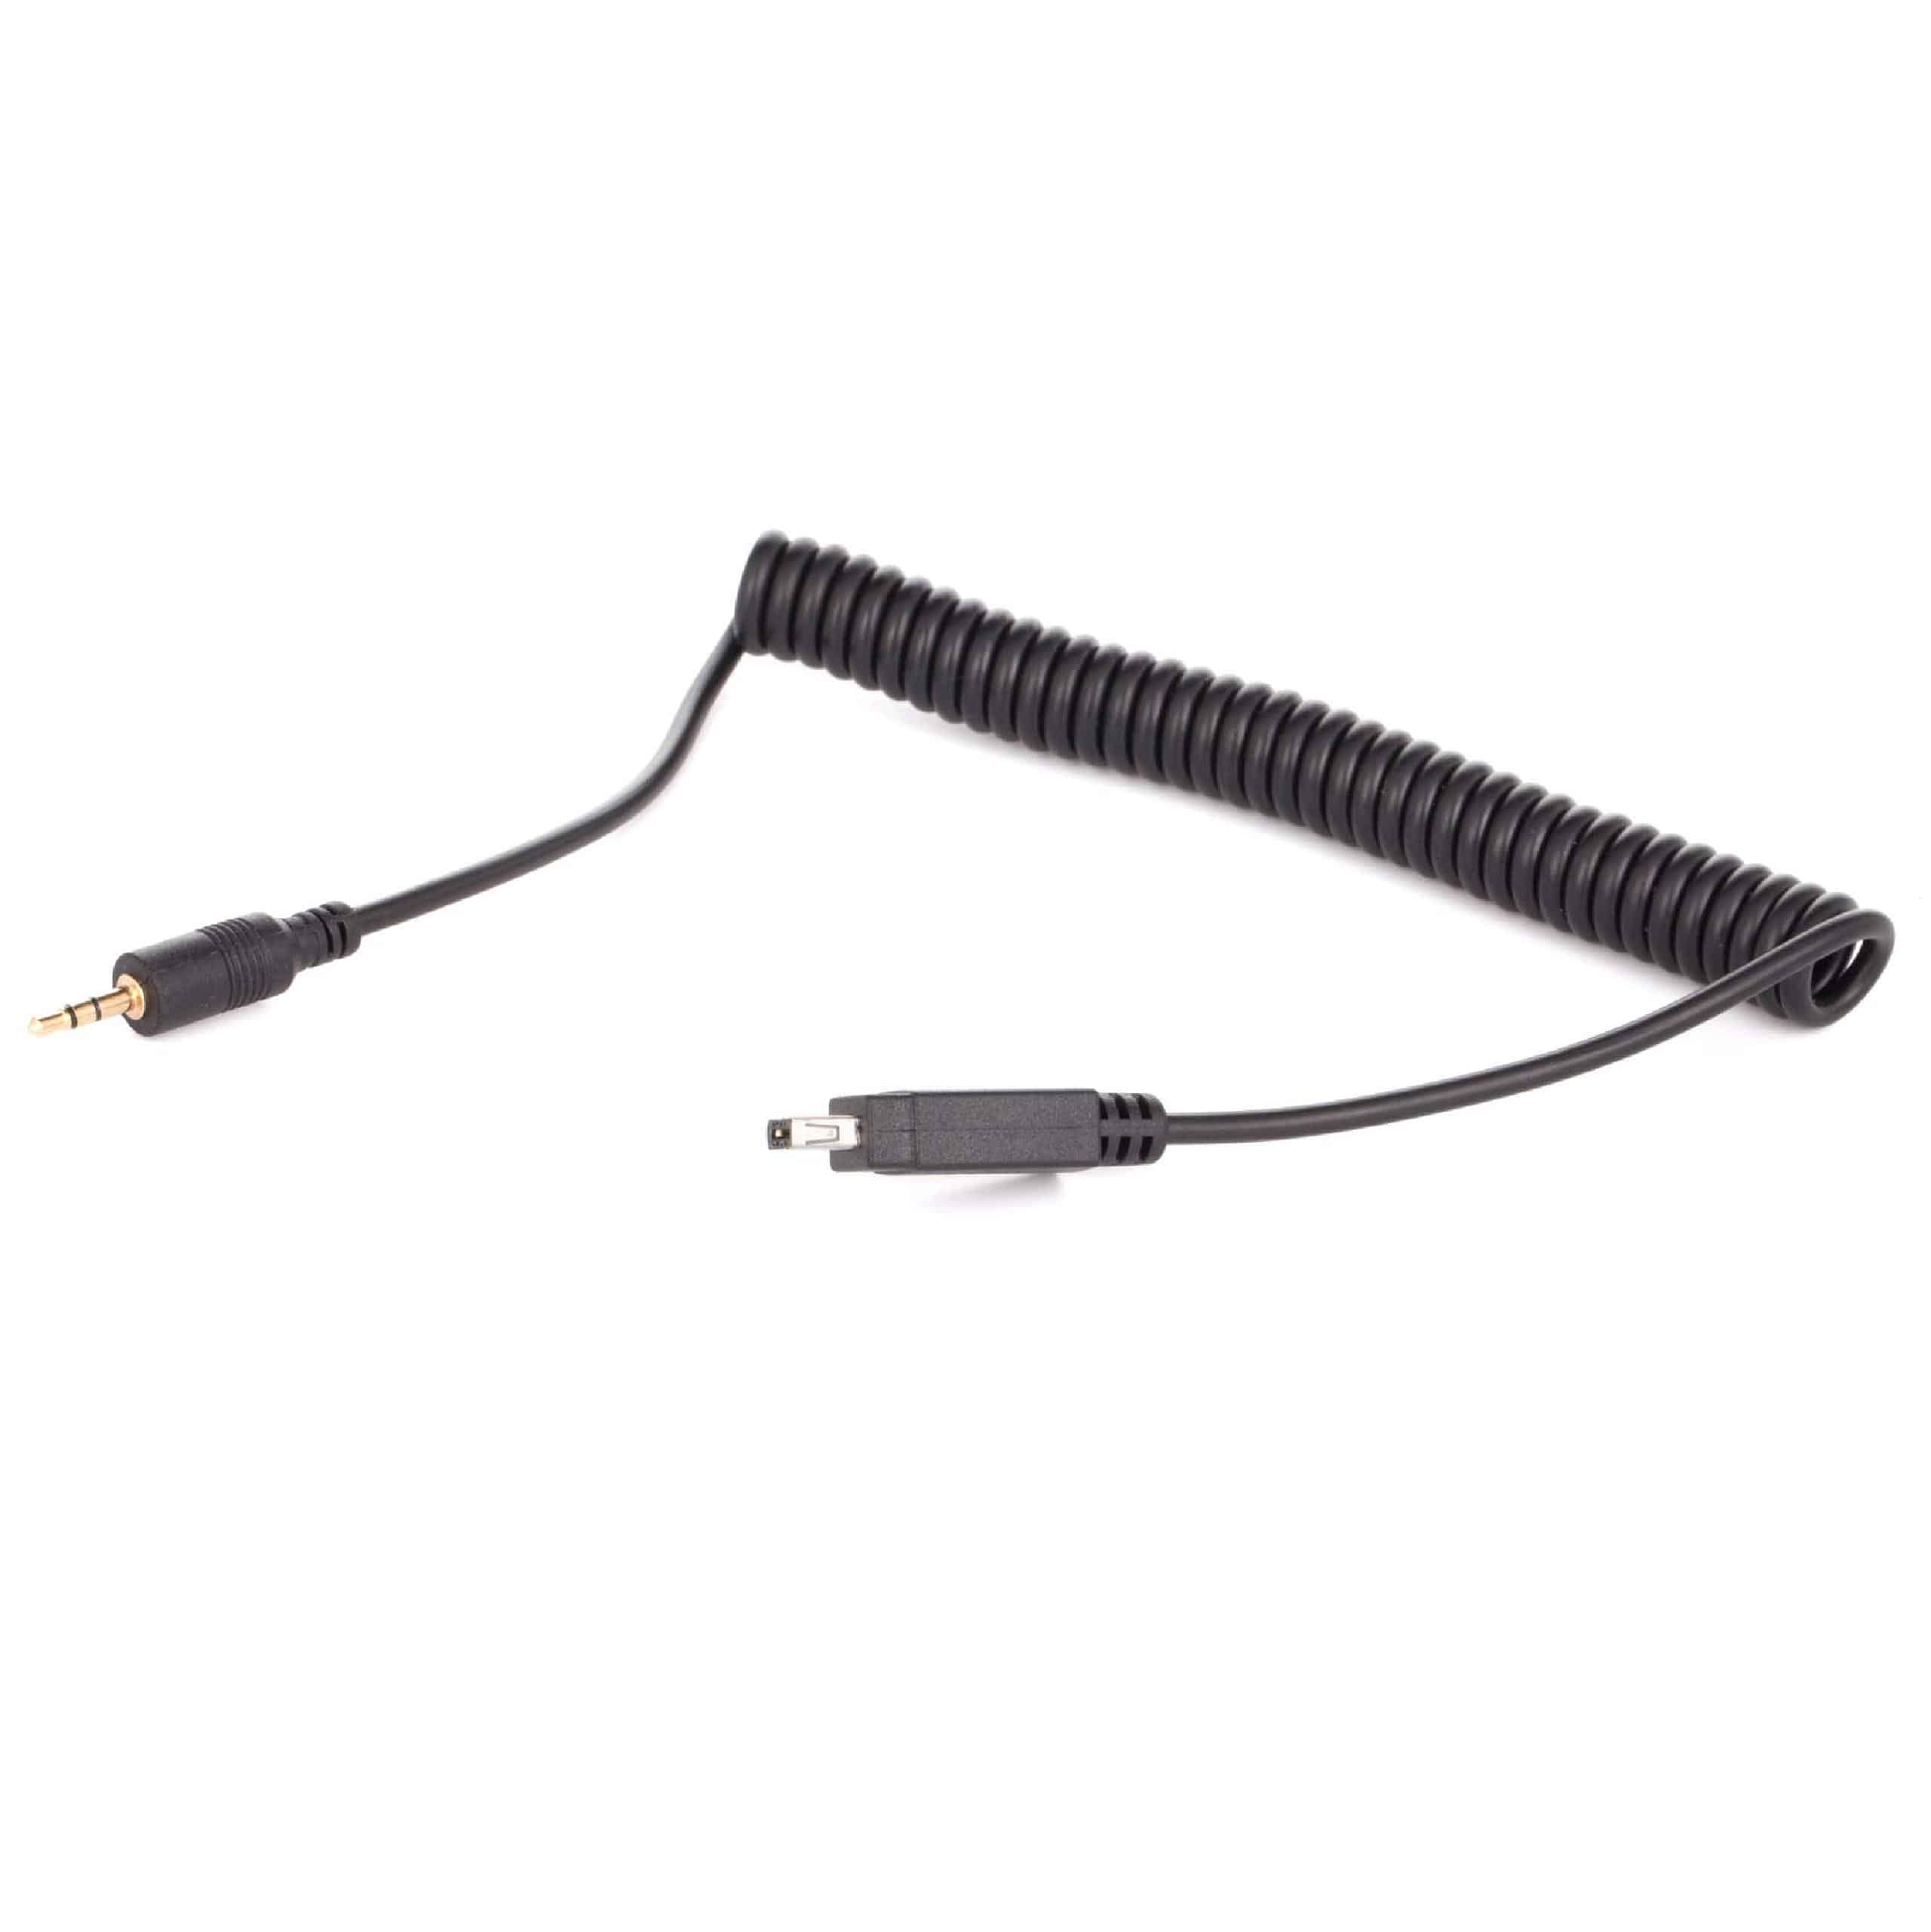 Cable for Shutter Release suitable for P7700 Nikon Coolpix P7700 Camera - 100 cm